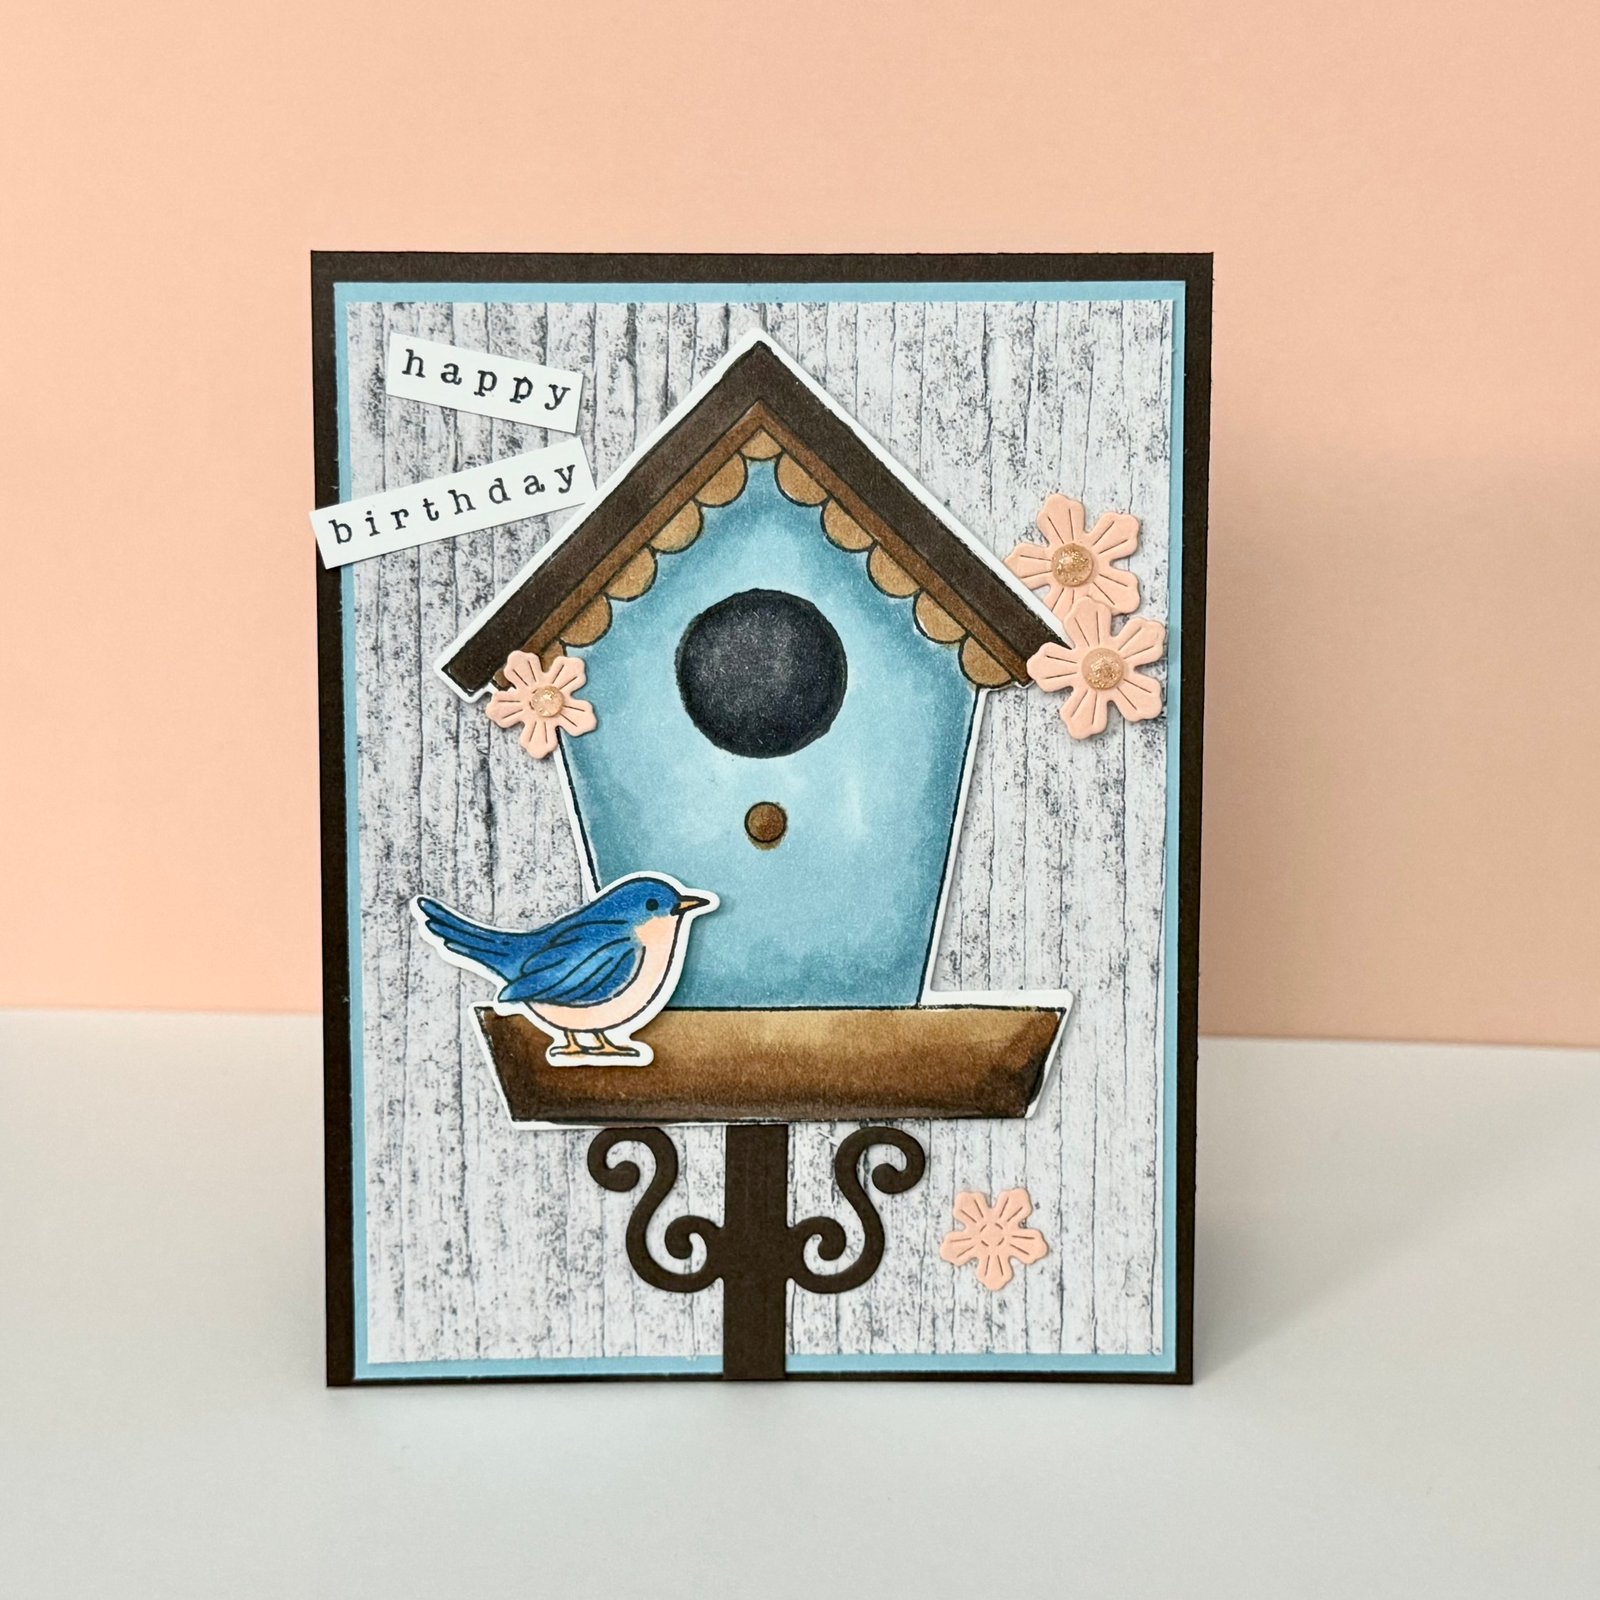 Stampin' Up! birthday card with Country Birdhouse bundle and country woods dsp background with a little bluebird